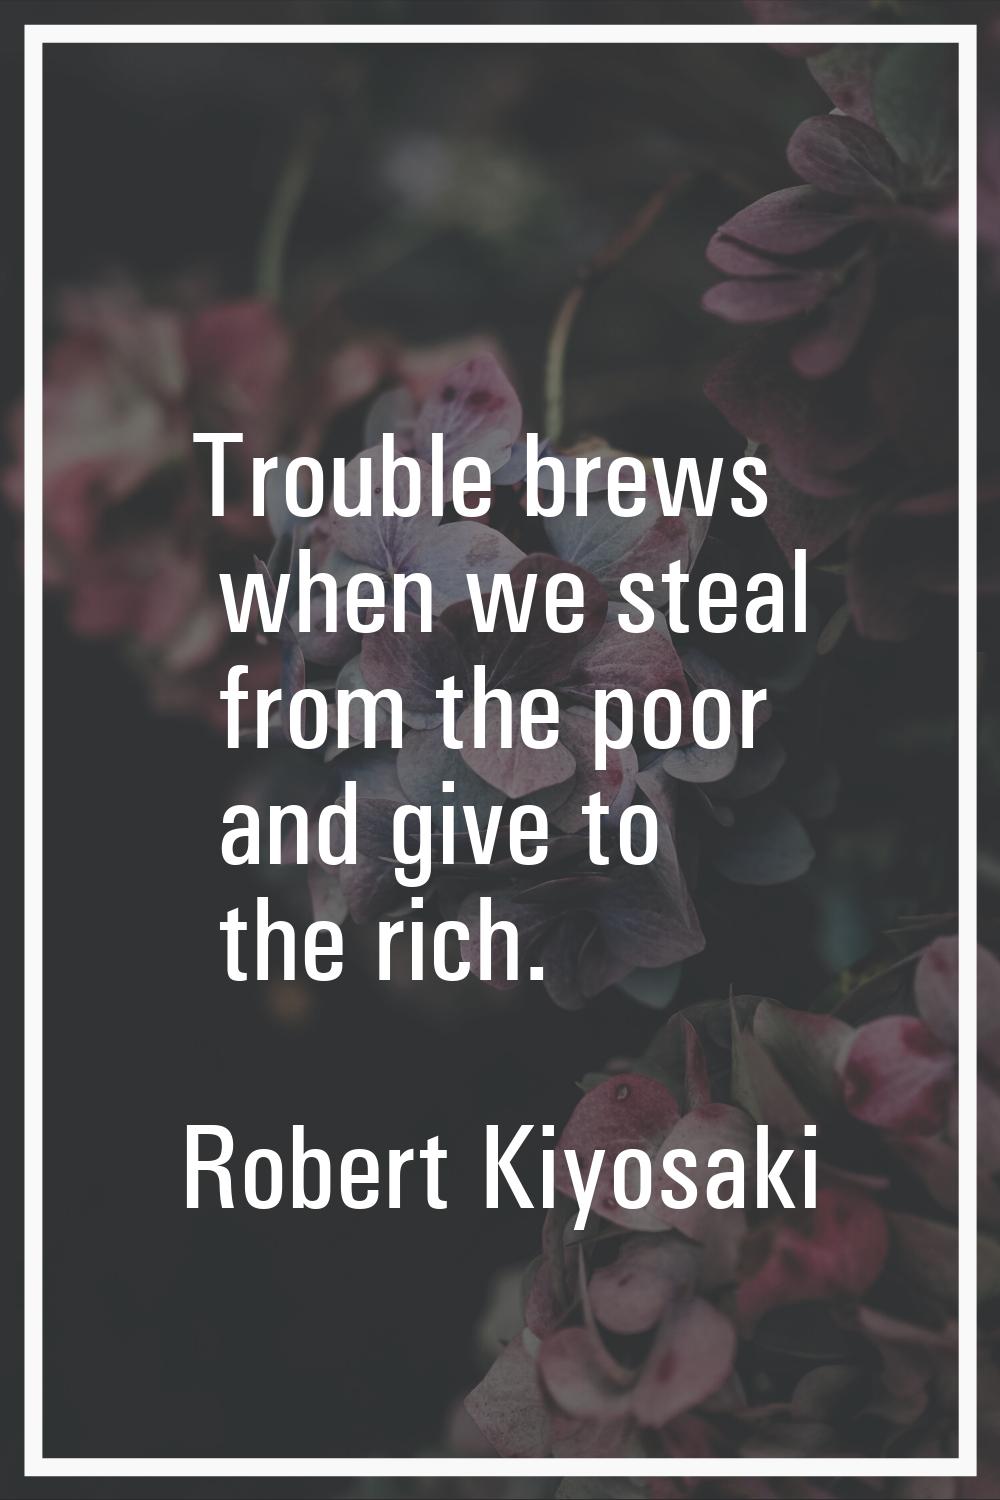 Trouble brews when we steal from the poor and give to the rich.